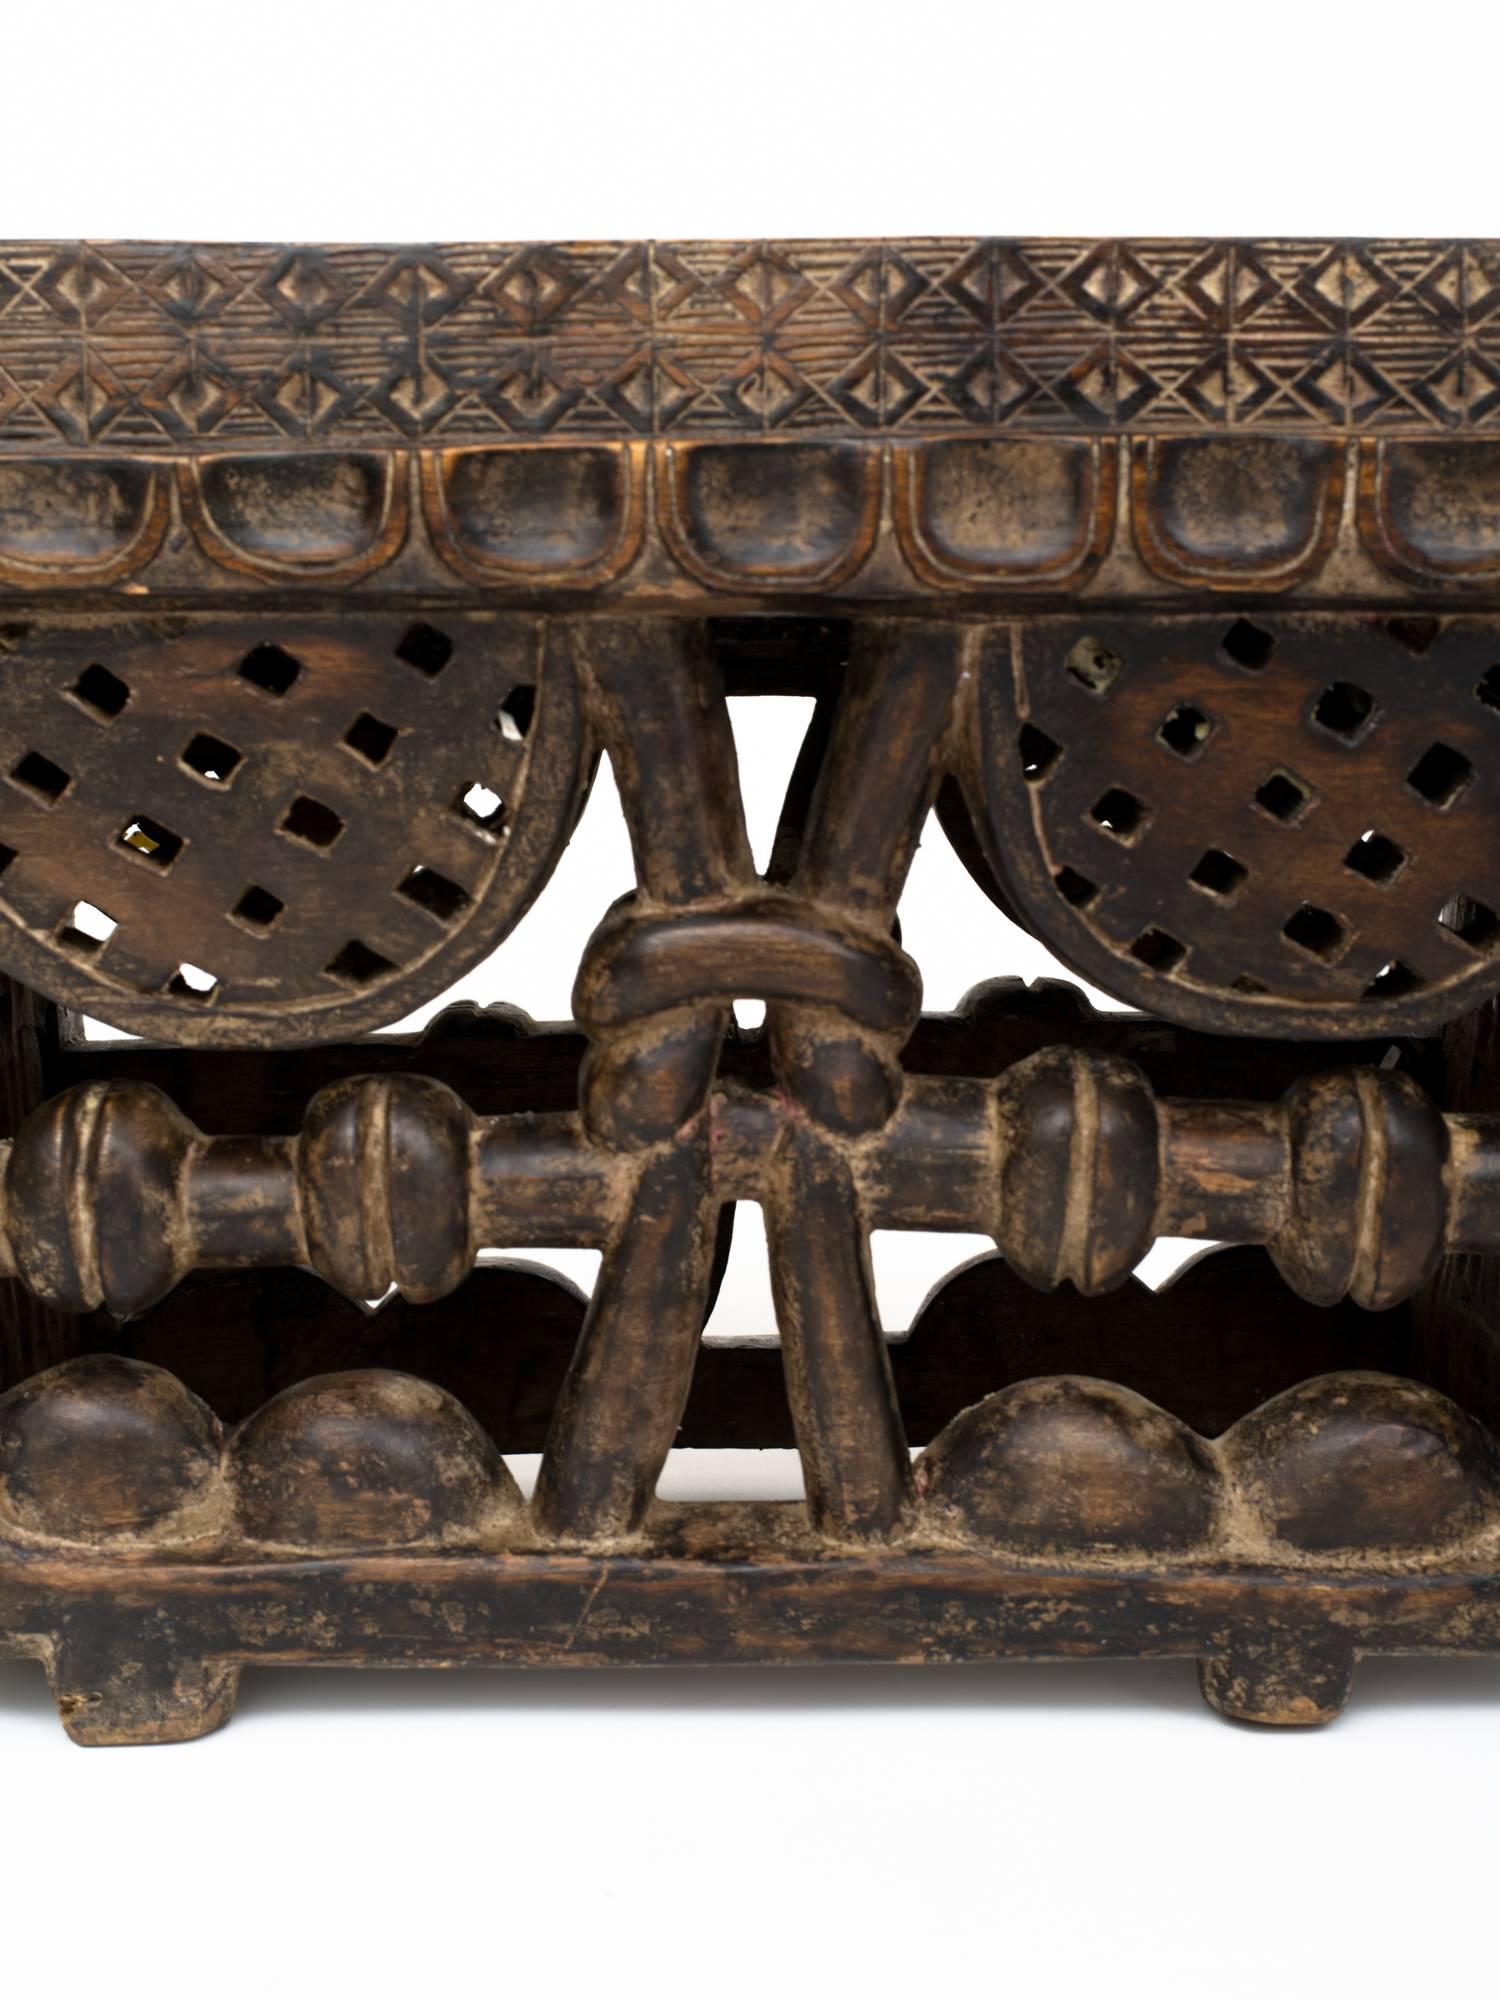 Large West African mahogany hand-carved standing game board. It is sculpted with a knot in the center of two sides, and elaborate carving throughout. 
The game is said to be called Oware, one of the oldest recorded games in the world. It is a West